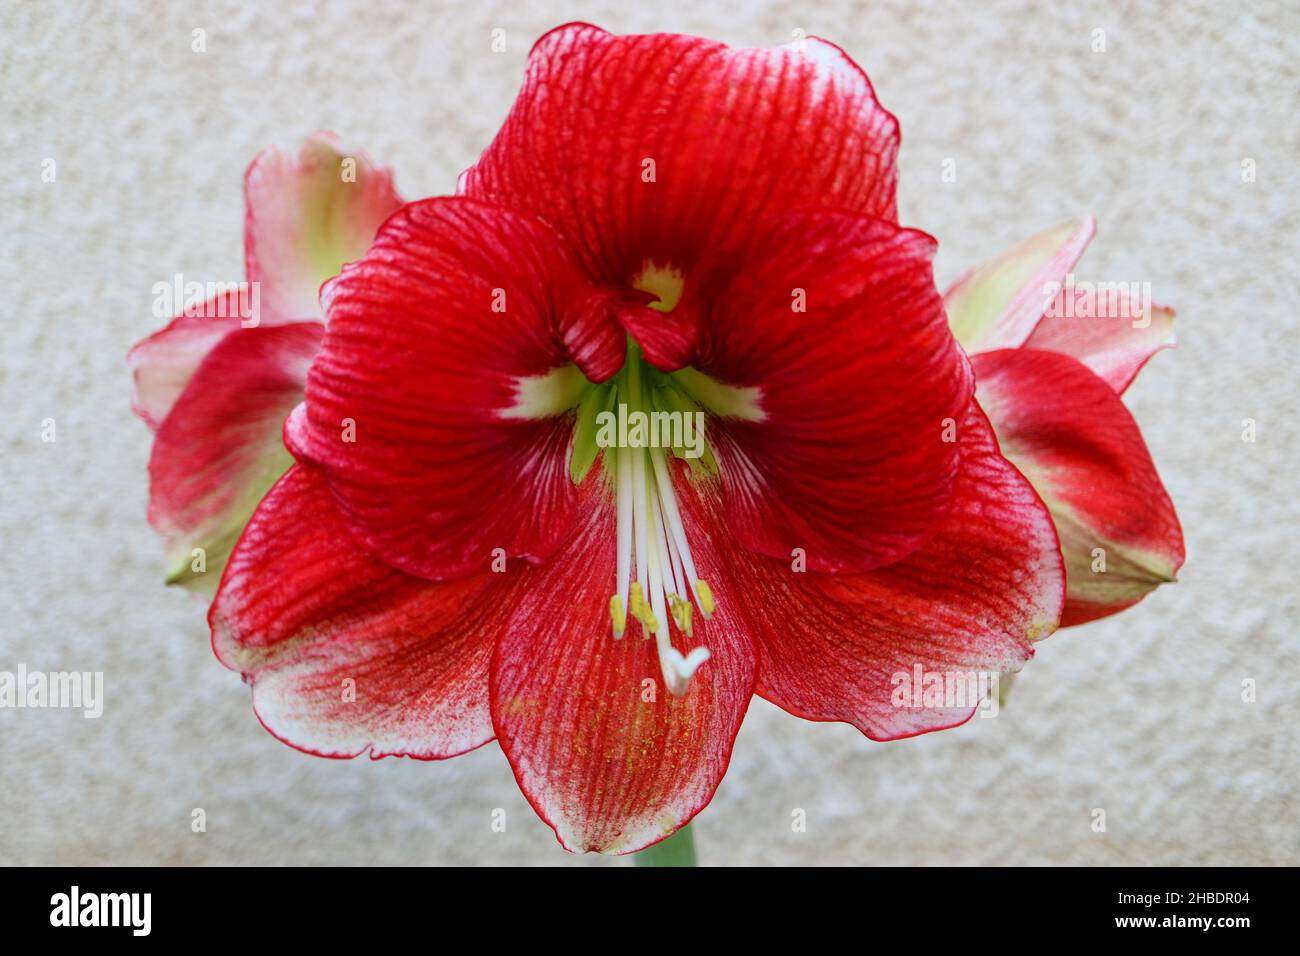 Red Amaryllis with delicate petals and long white stamens , red amaryllis with wall background, flower head, red flowers macro,  beauty in nature, Stock Photo